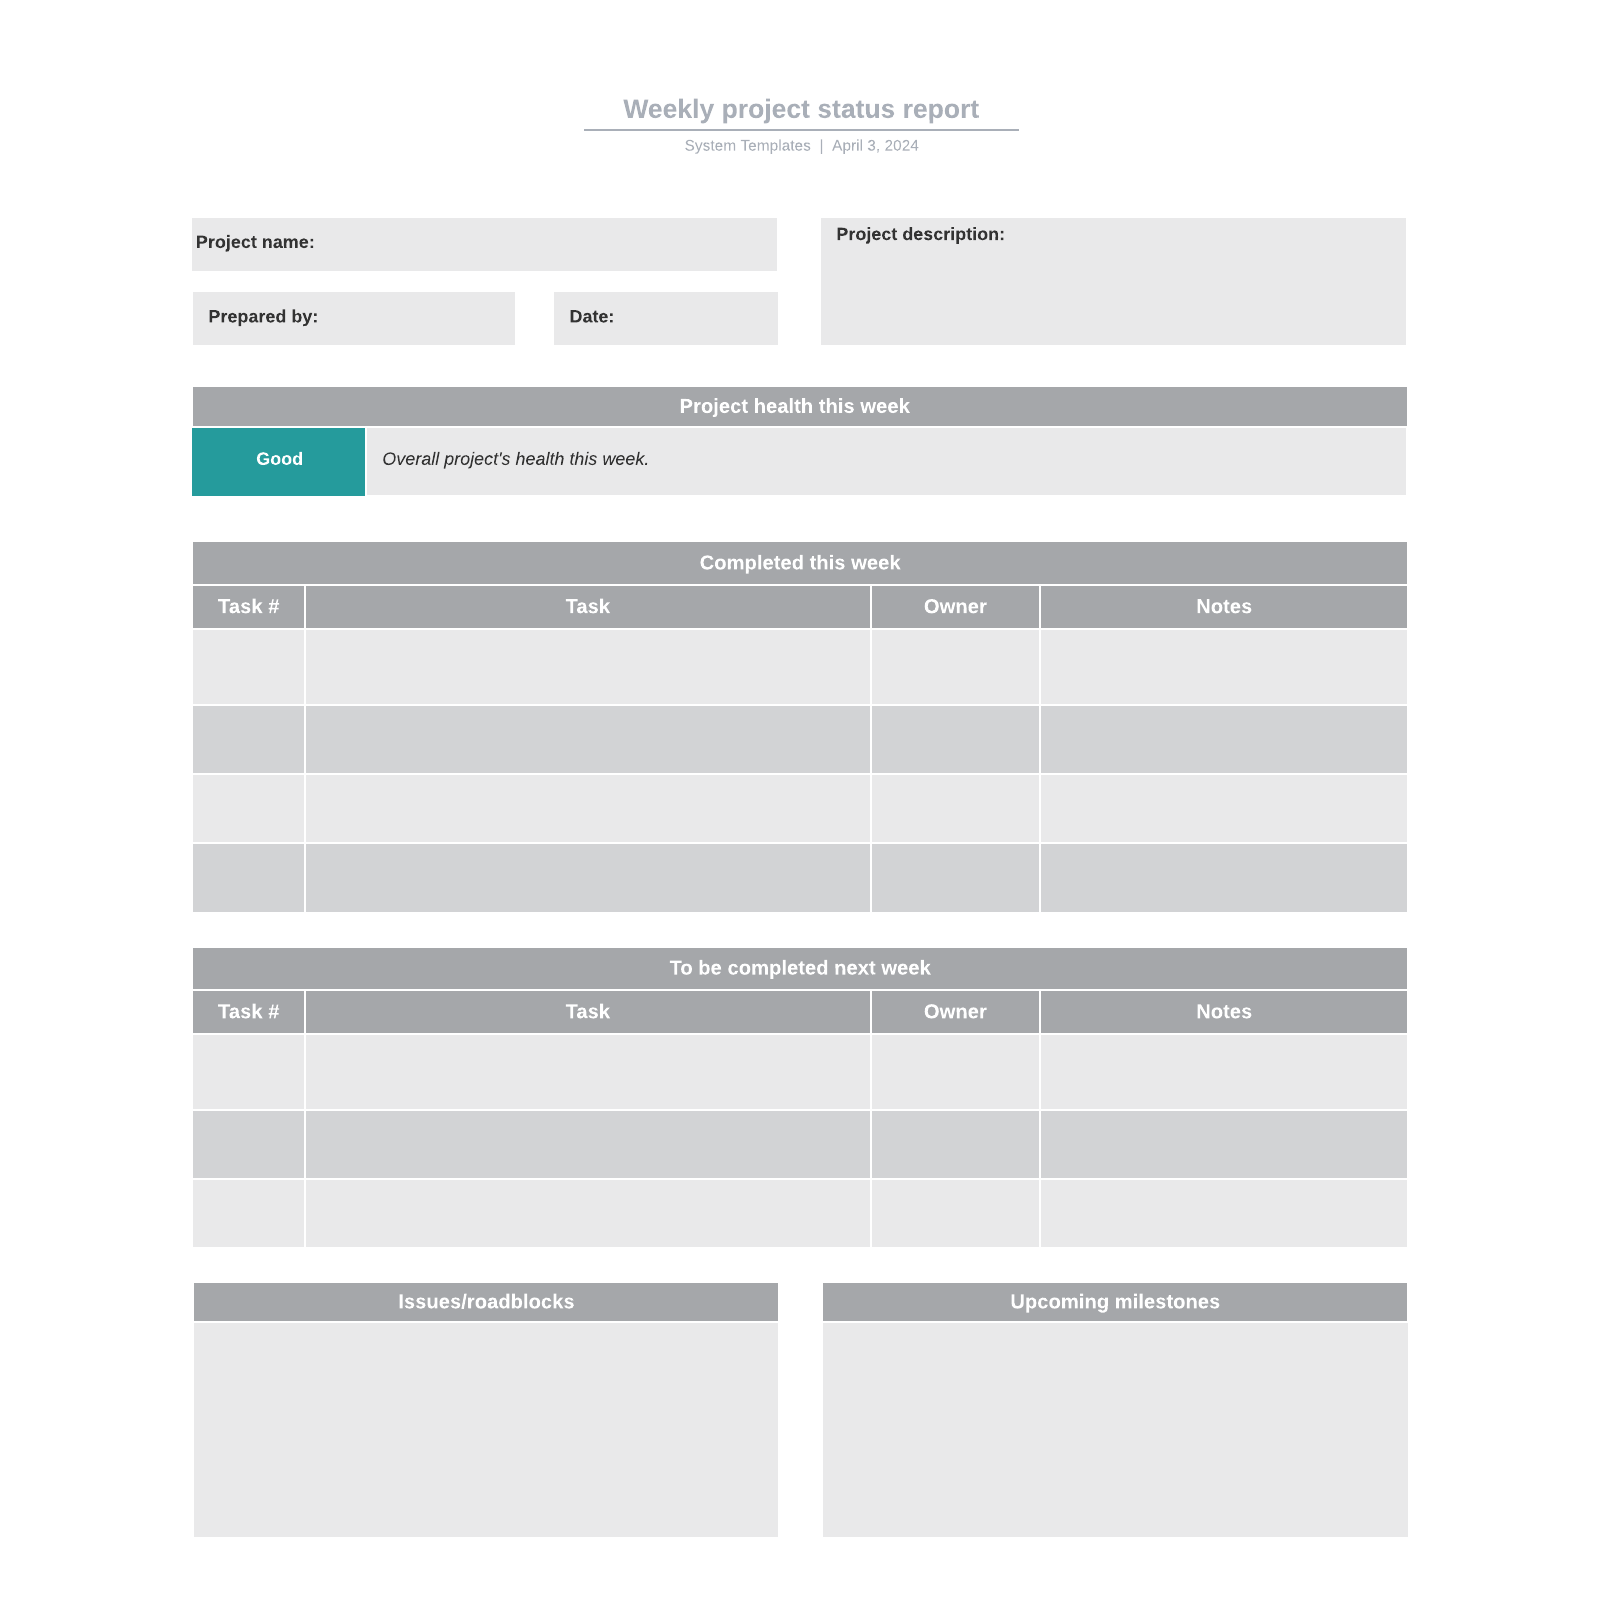 Weekly project status report example